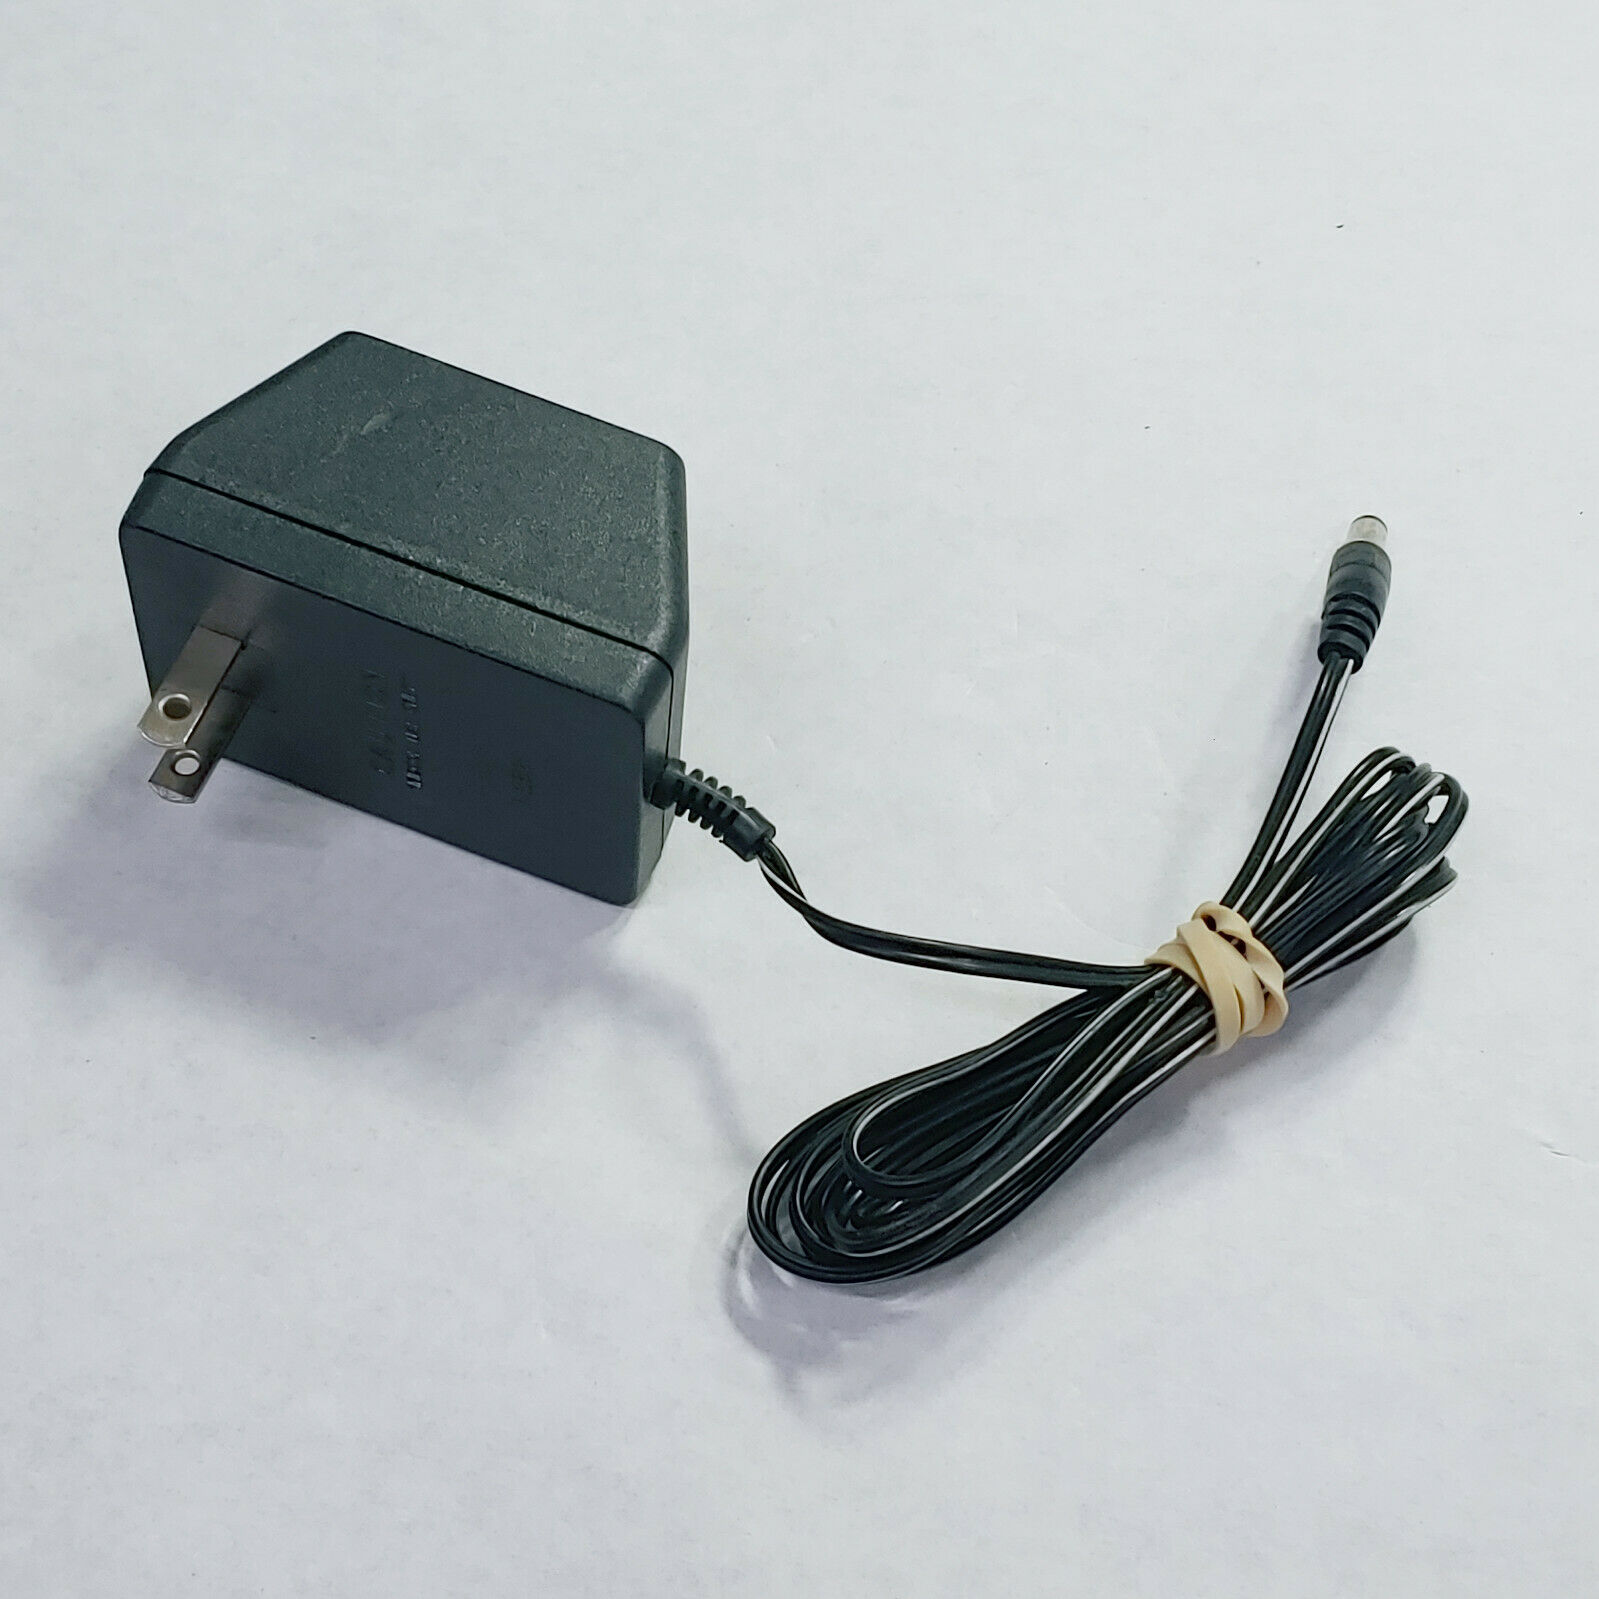 DC 12V 1A 2A 3A 5A Power Supply Adapter Charger Transformer For 5050 LED Strips